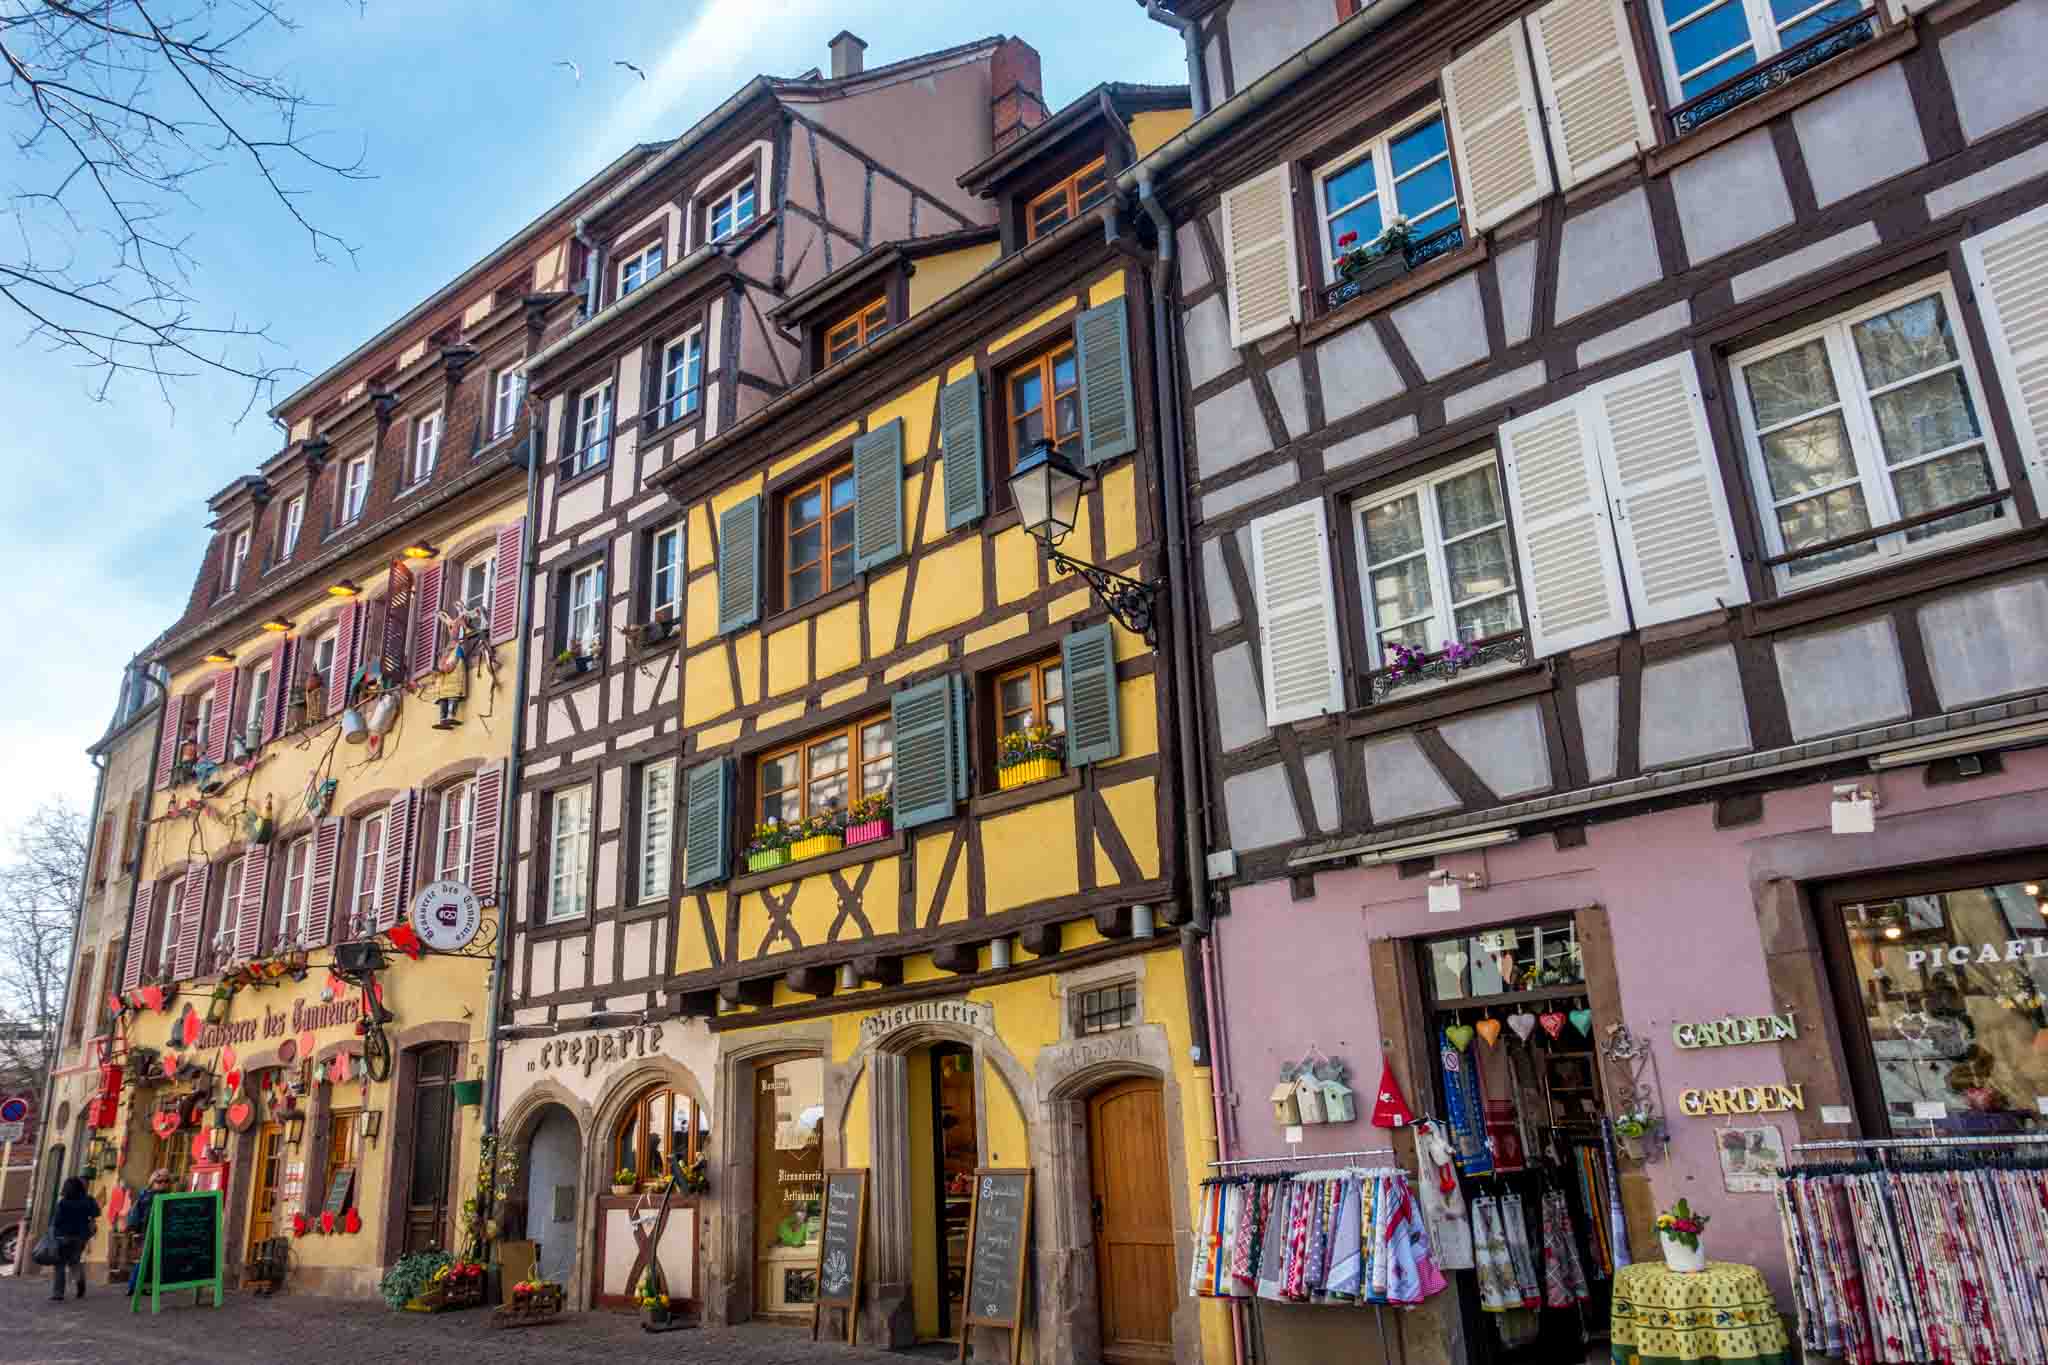 Half-timbered buildings housing shops and restaurants.